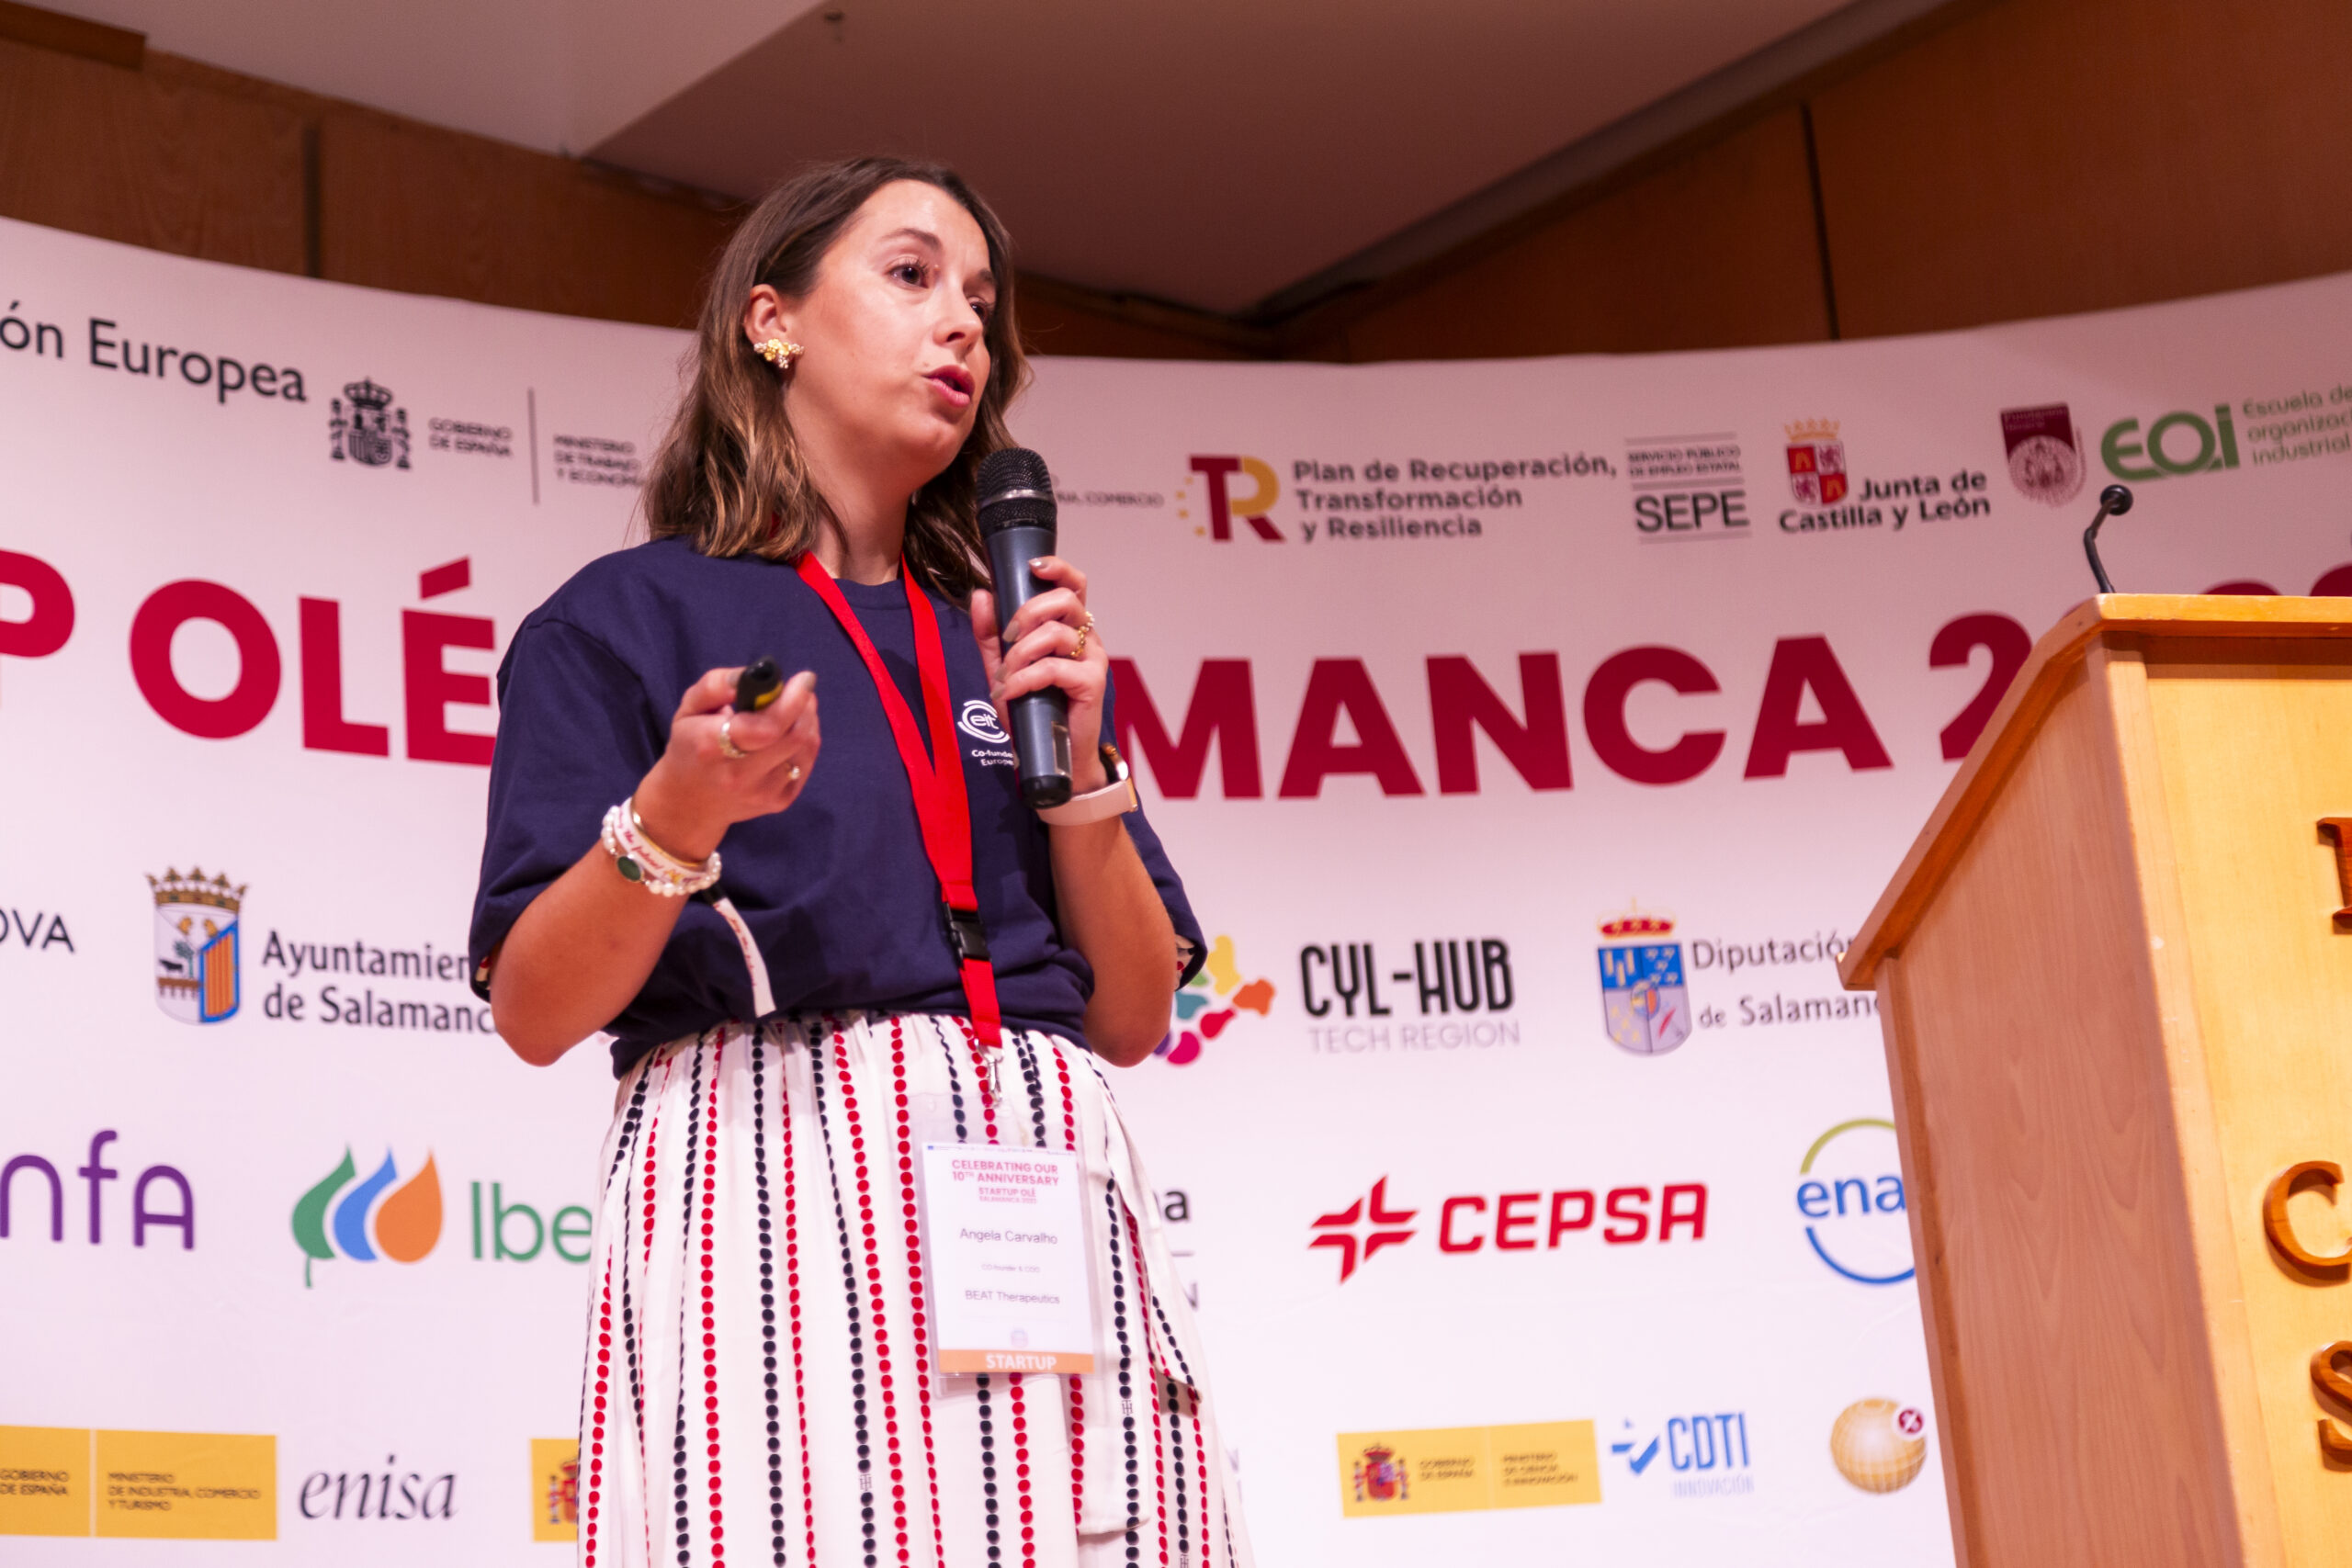 Portuguese start-up BEAT Therapeutics, accelerated by EIT Health, wins prestigious award in Europe’s leading start-up event in Spain